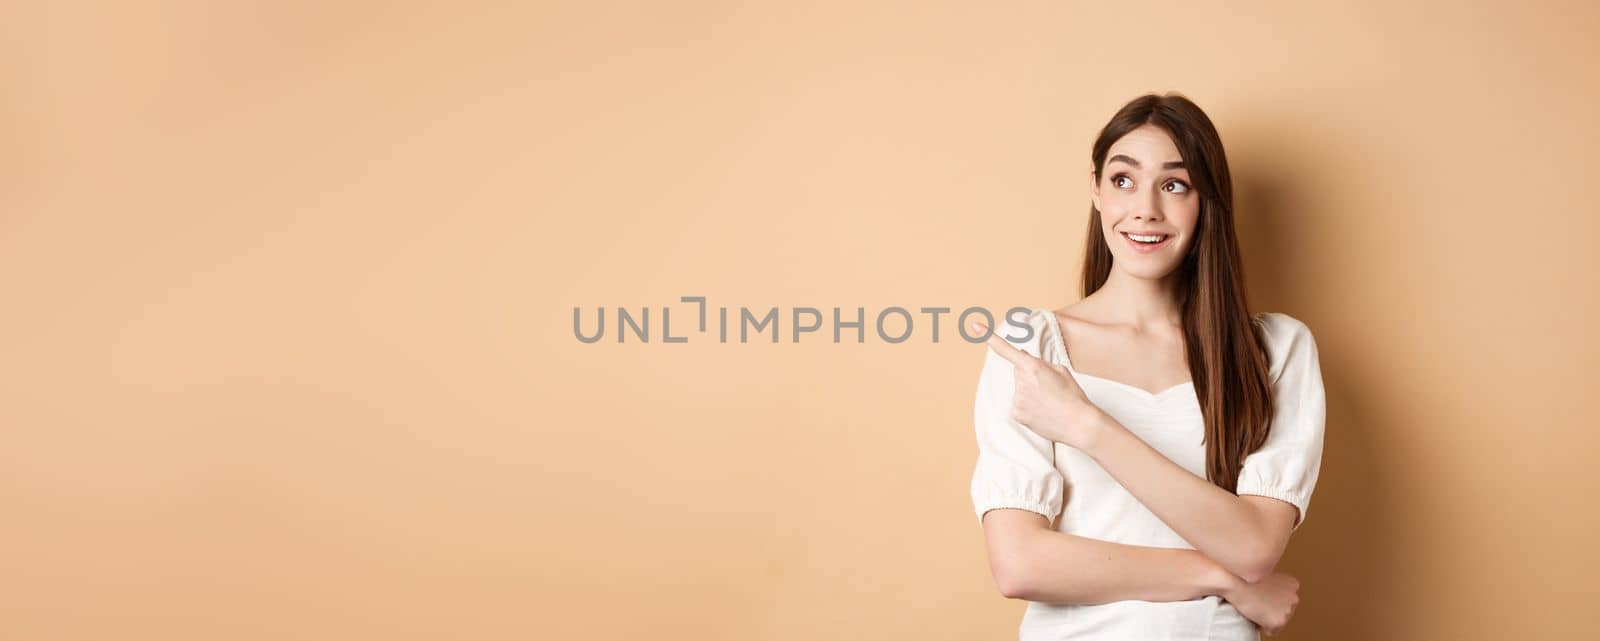 Cheerful tender girl in white dress checking out promo offer, looking and pointing at upper left corner with dreamy smile, standing on beige background.